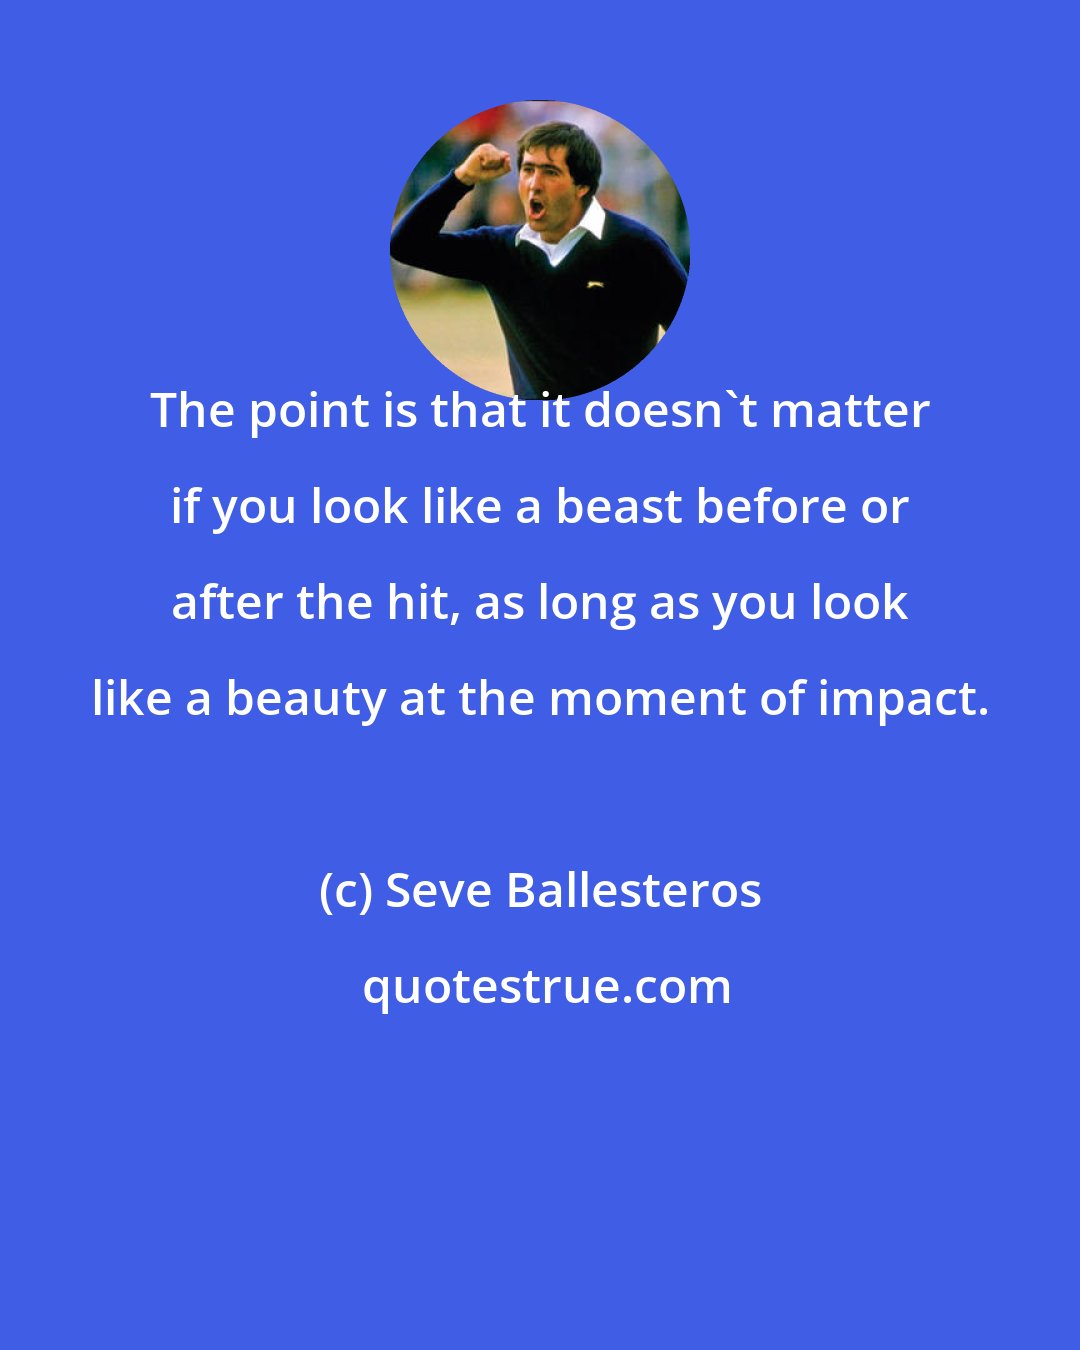 Seve Ballesteros: The point is that it doesn't matter if you look like a beast before or after the hit, as long as you look like a beauty at the moment of impact.